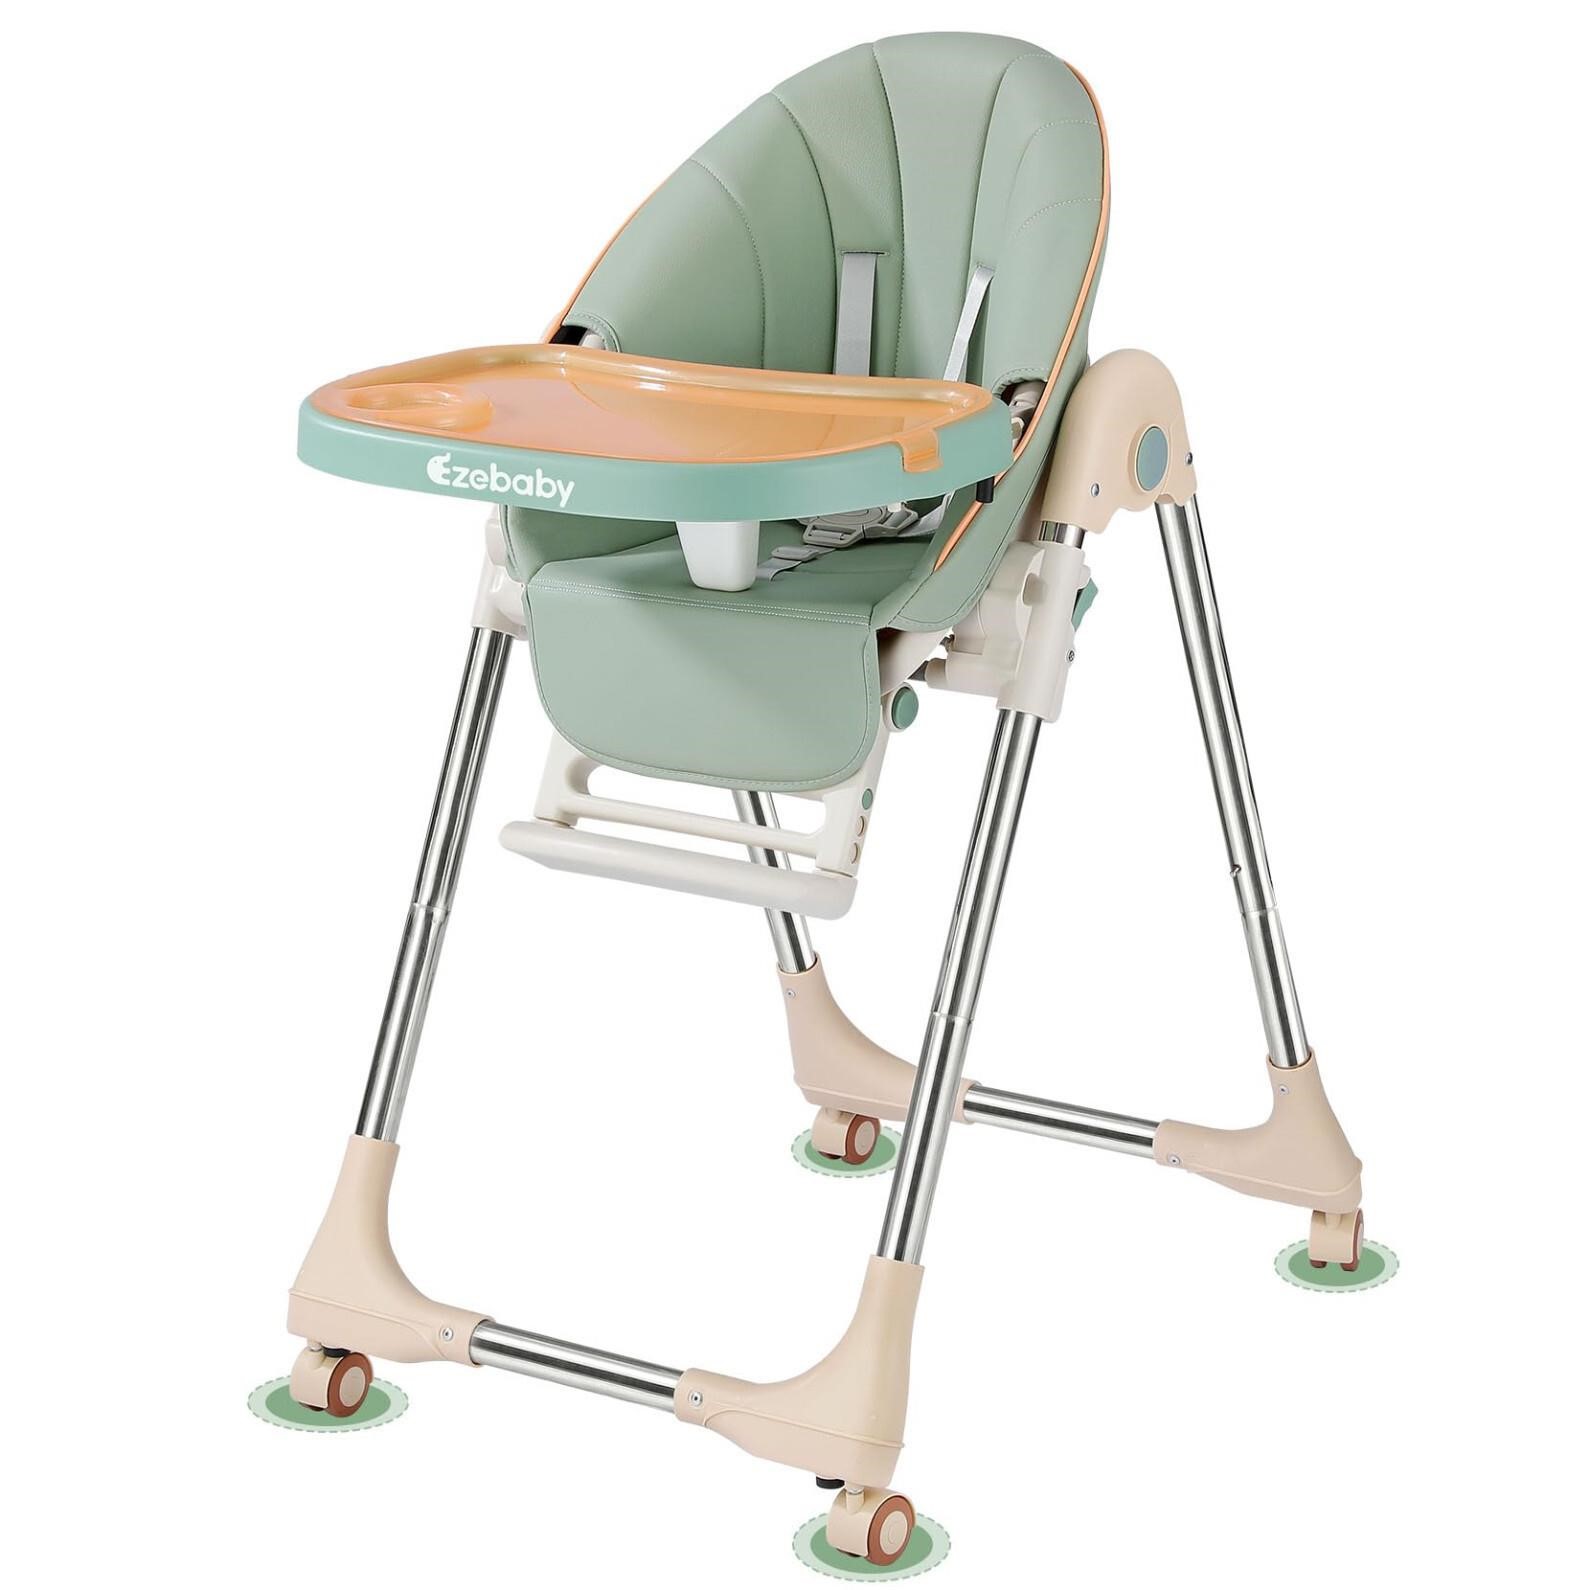 Ezebaby Baby High Chair, Portable High Chair with